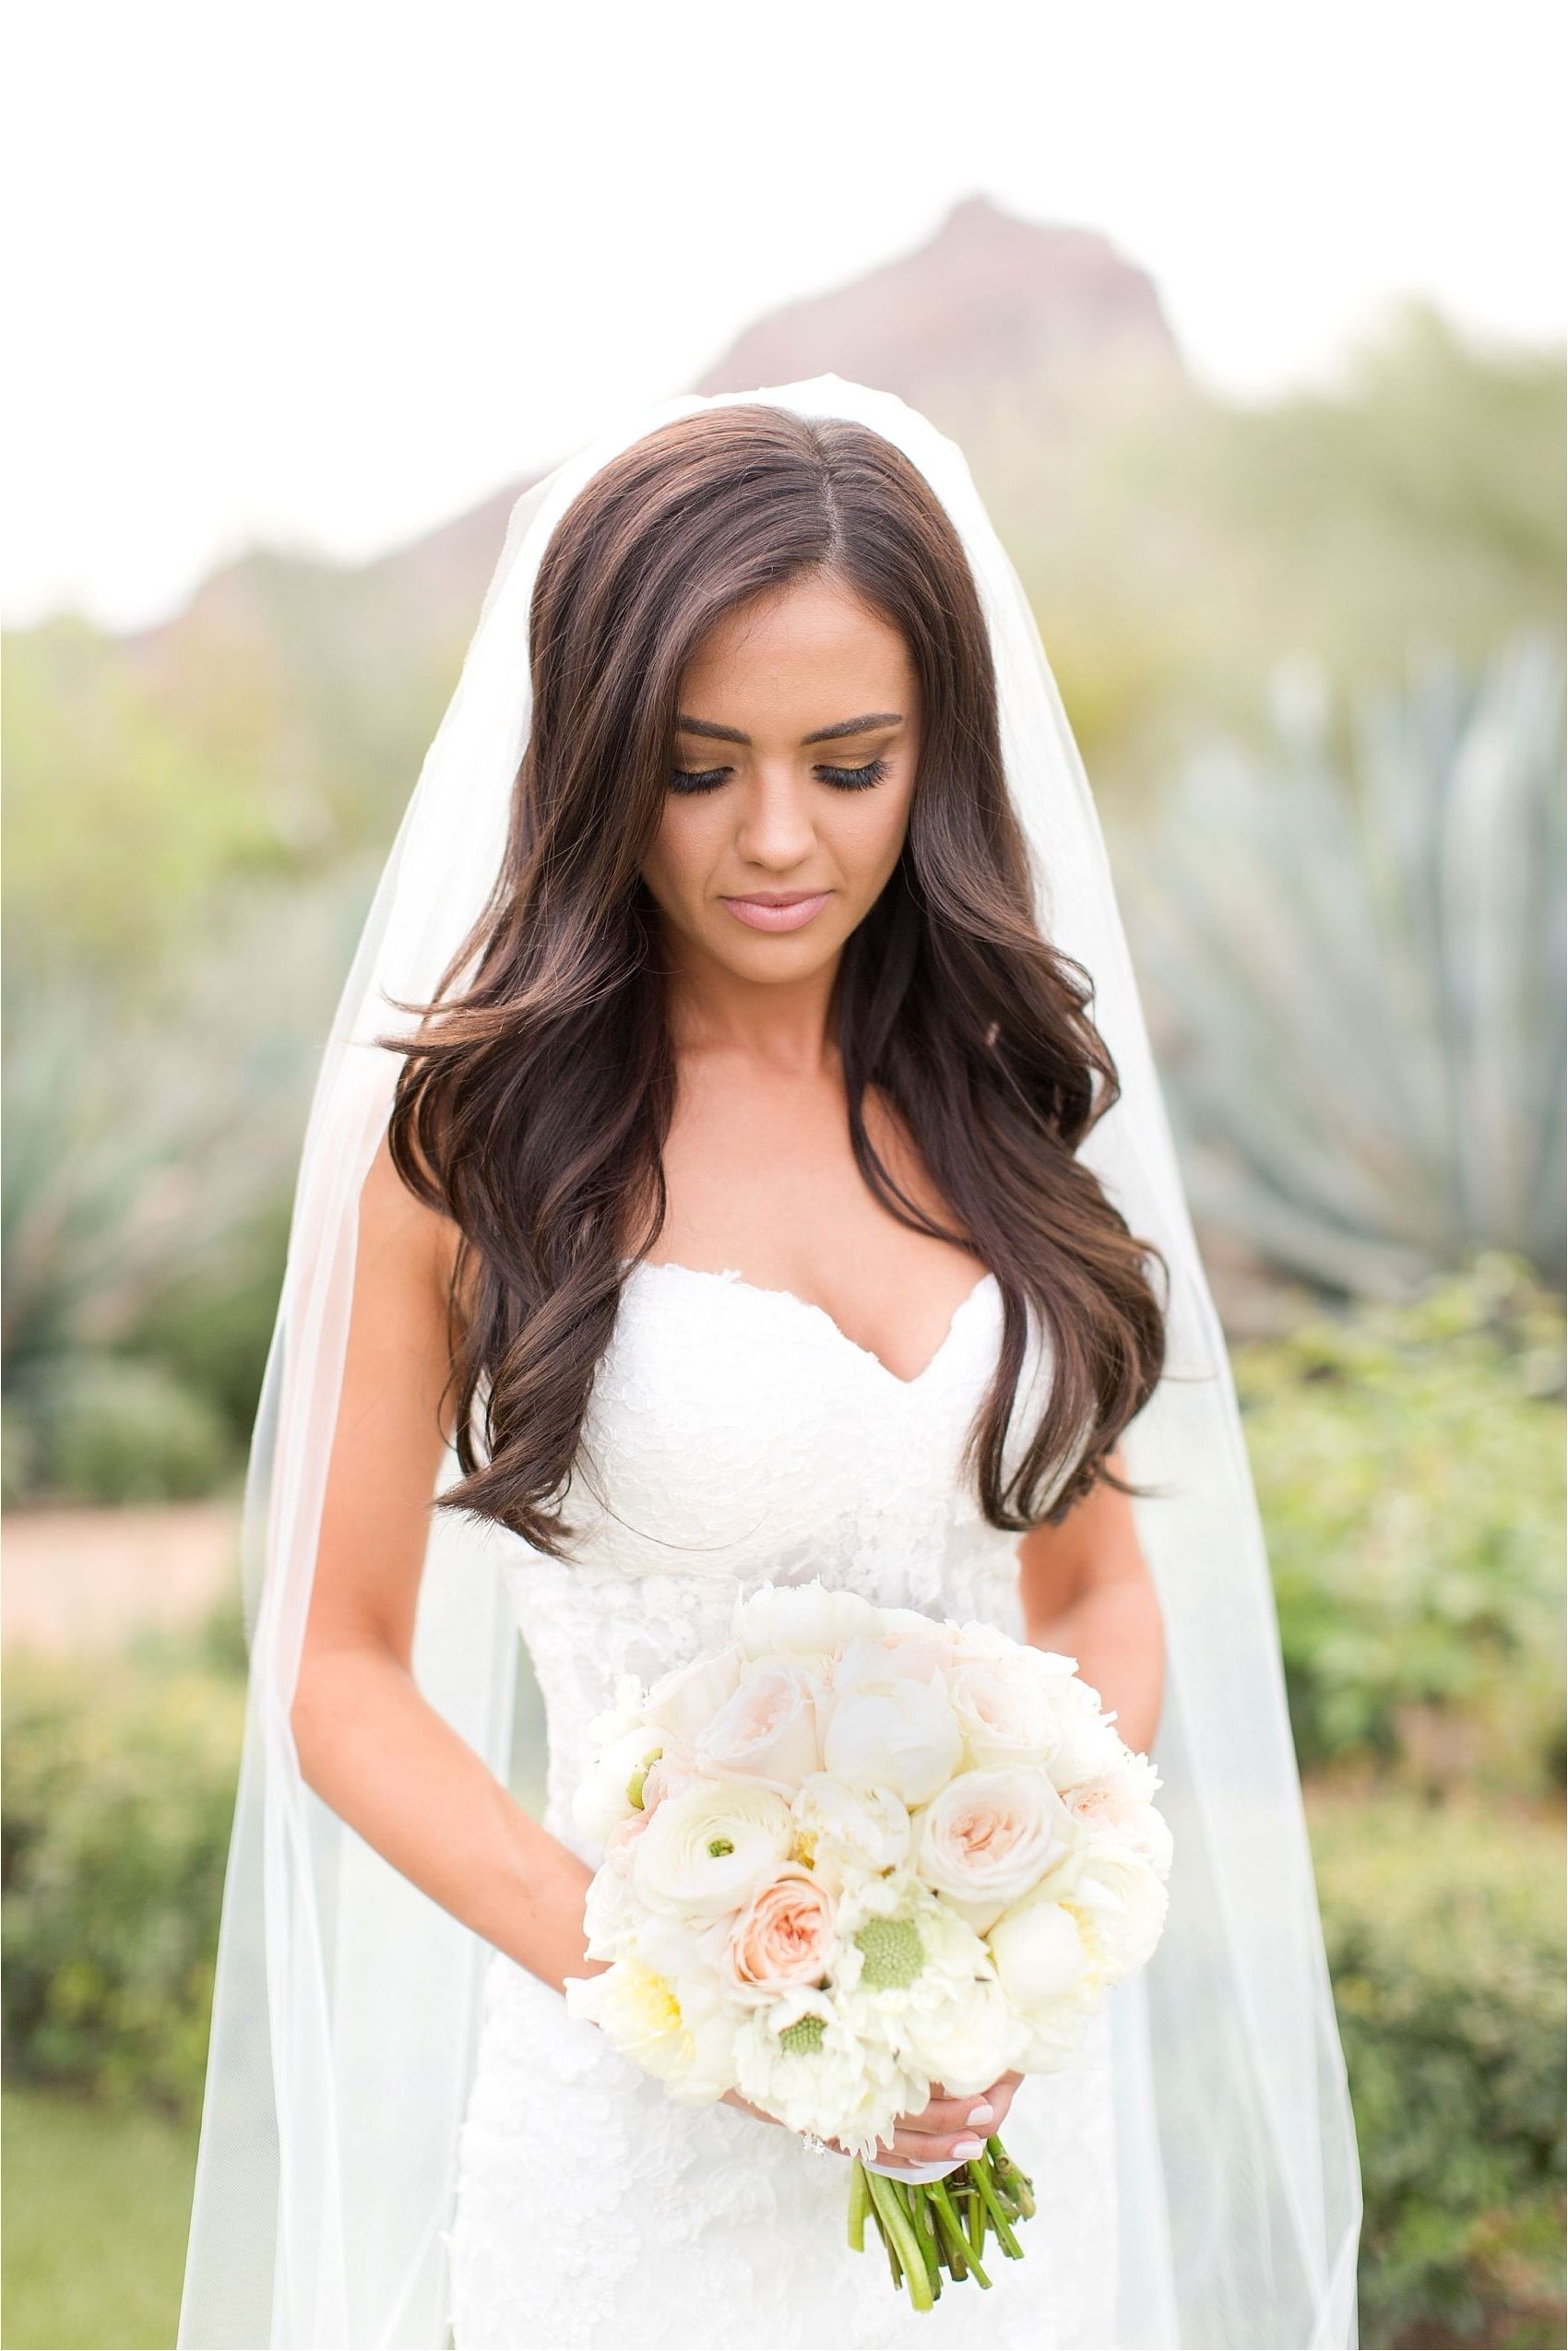 Most Recently Released Down Curly Wedding Hairstyles Intended For Ideas Long Pulled Back Loose Waves Wedding Hairstyle Curls Hair Half (View 4 of 15)